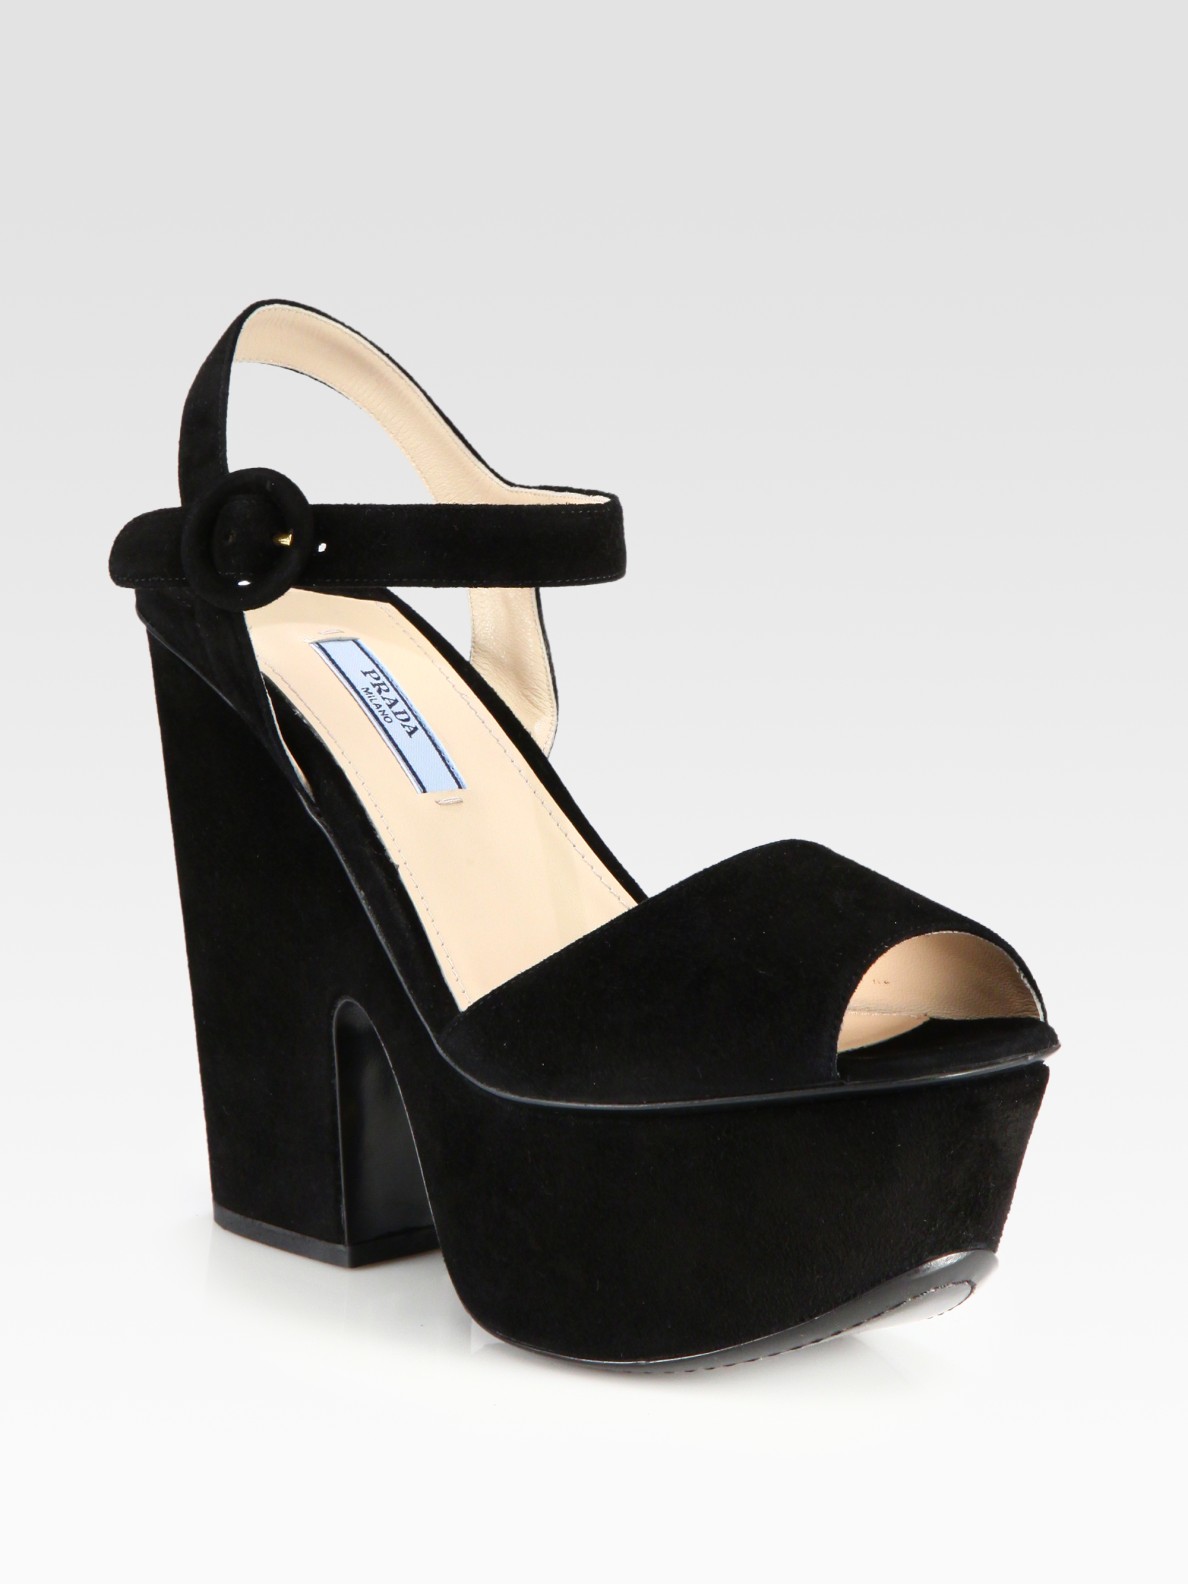 Lyst - Prada Suede and Patent Leather Platform Sandals in Black